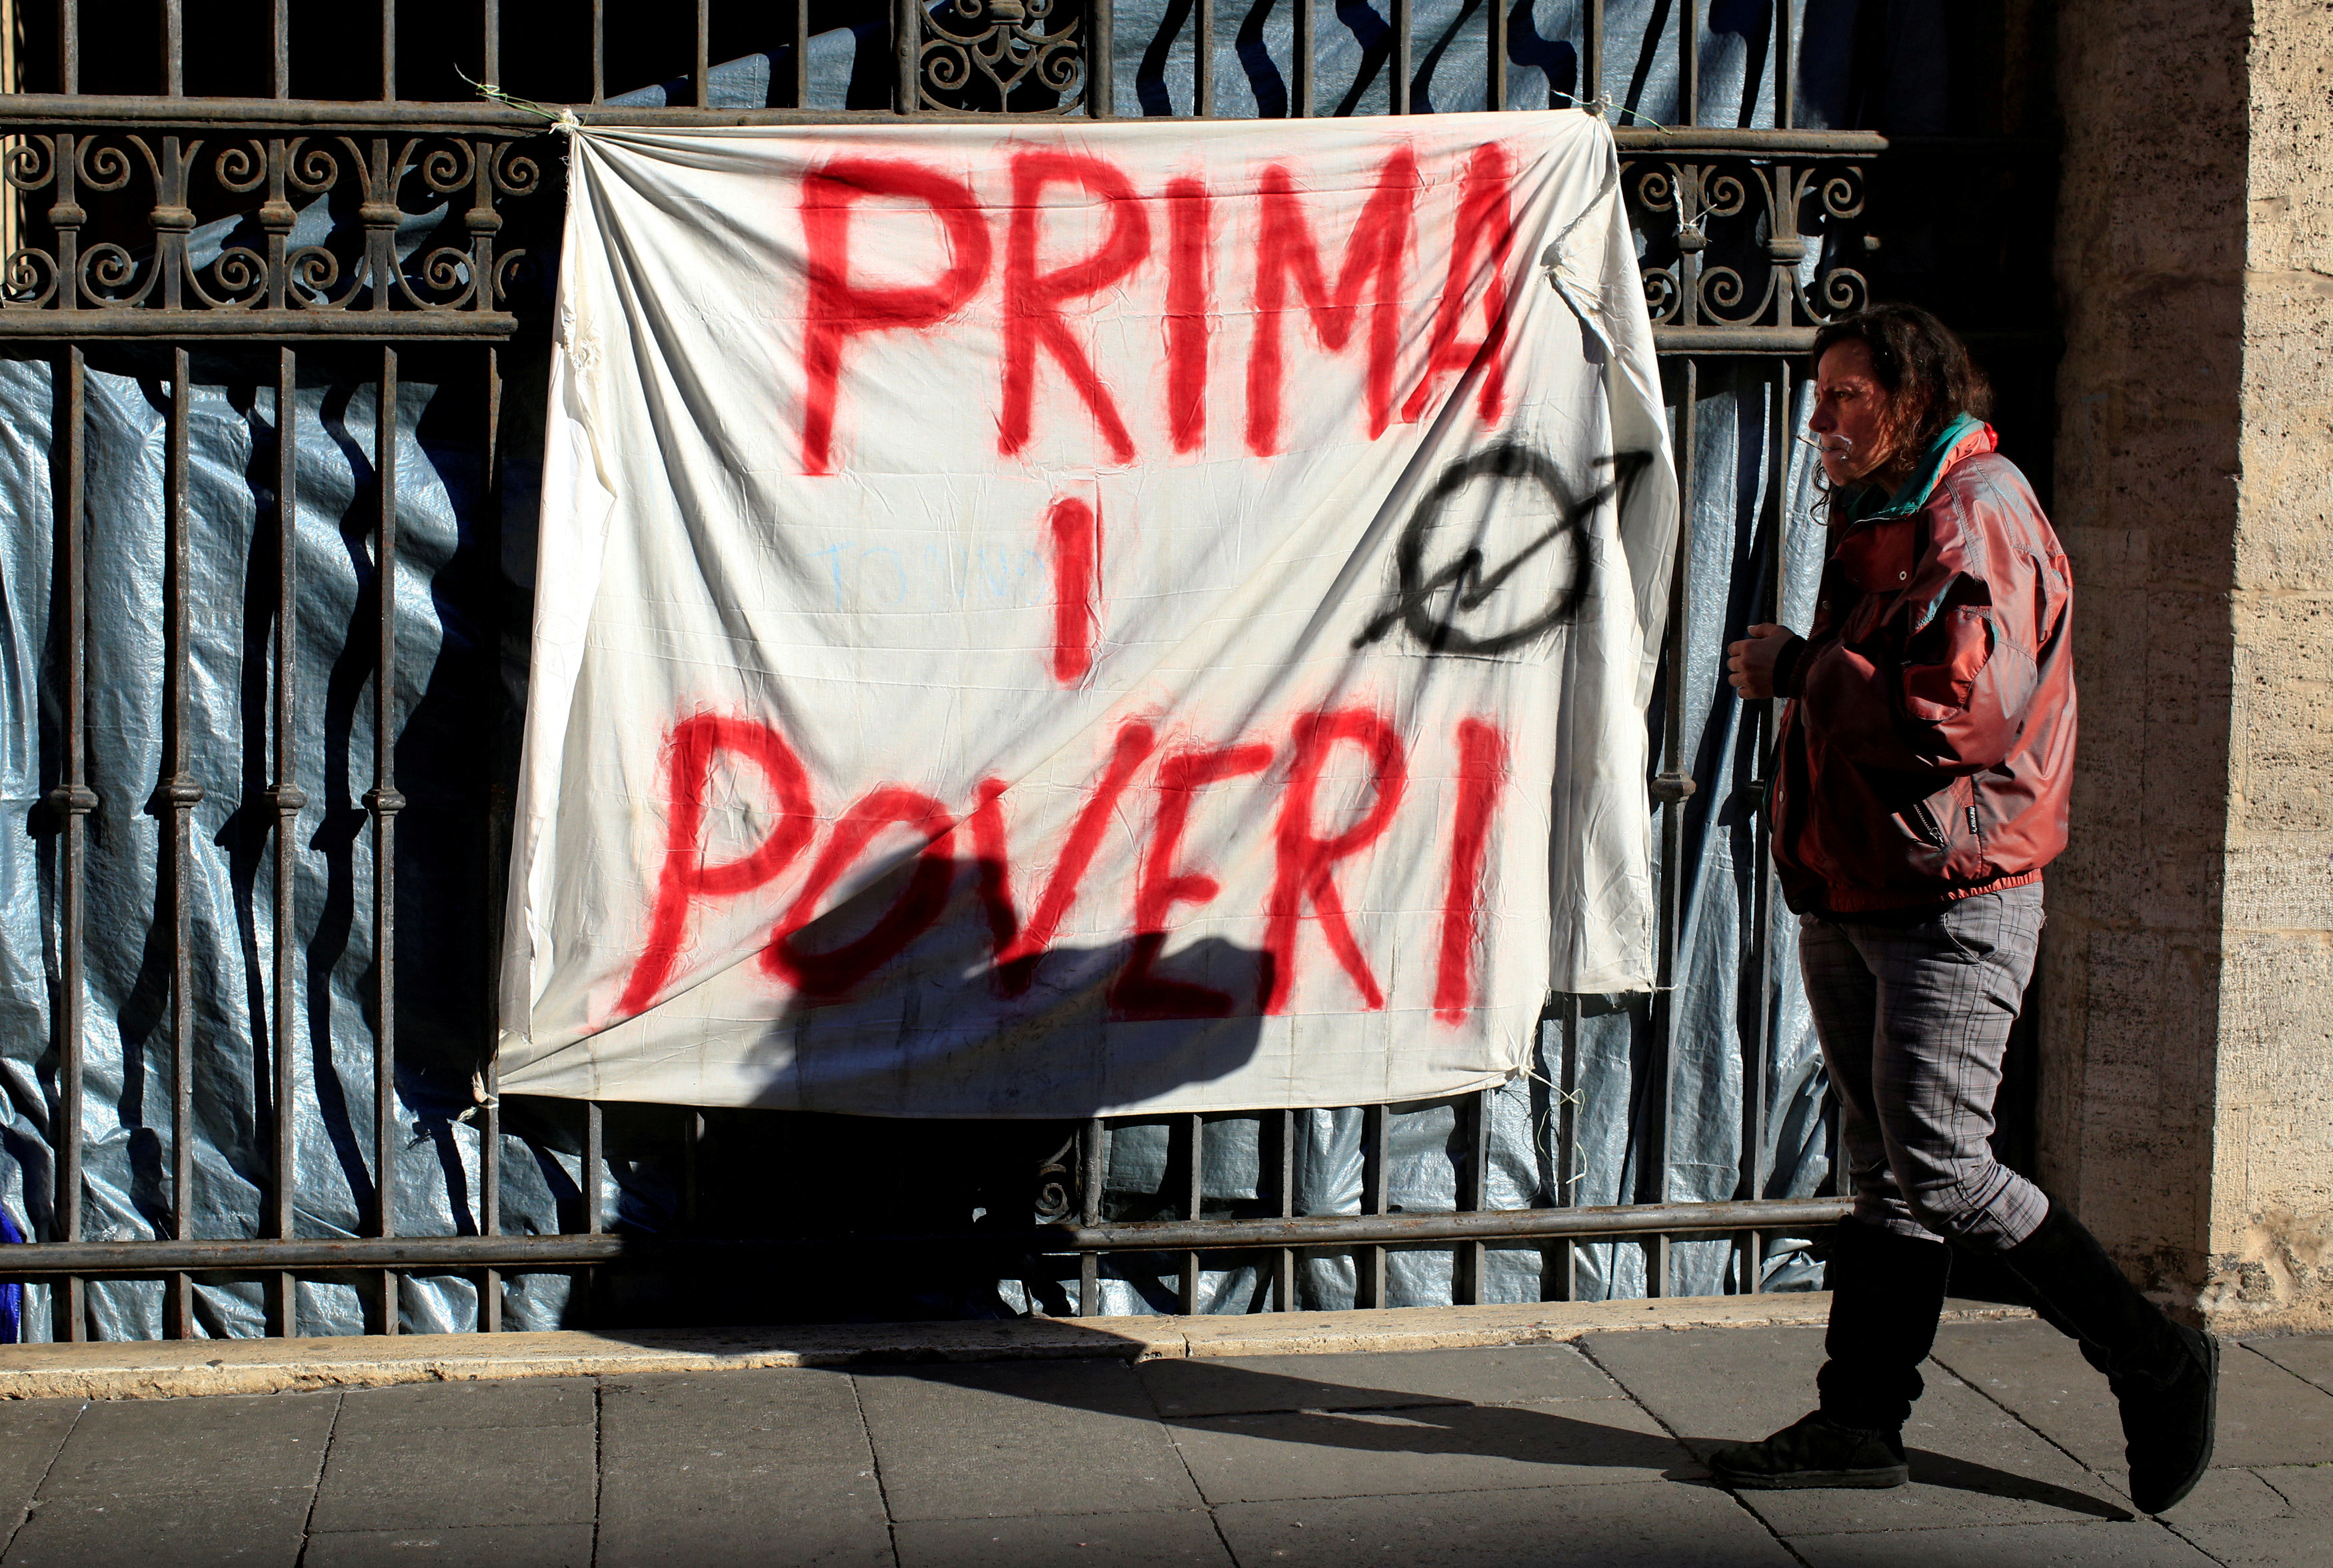 Angela Grossi walks past a banner reading "Poor first", hanging in a gate of the portico of the Basilica of the Santi Apostoli in Rome